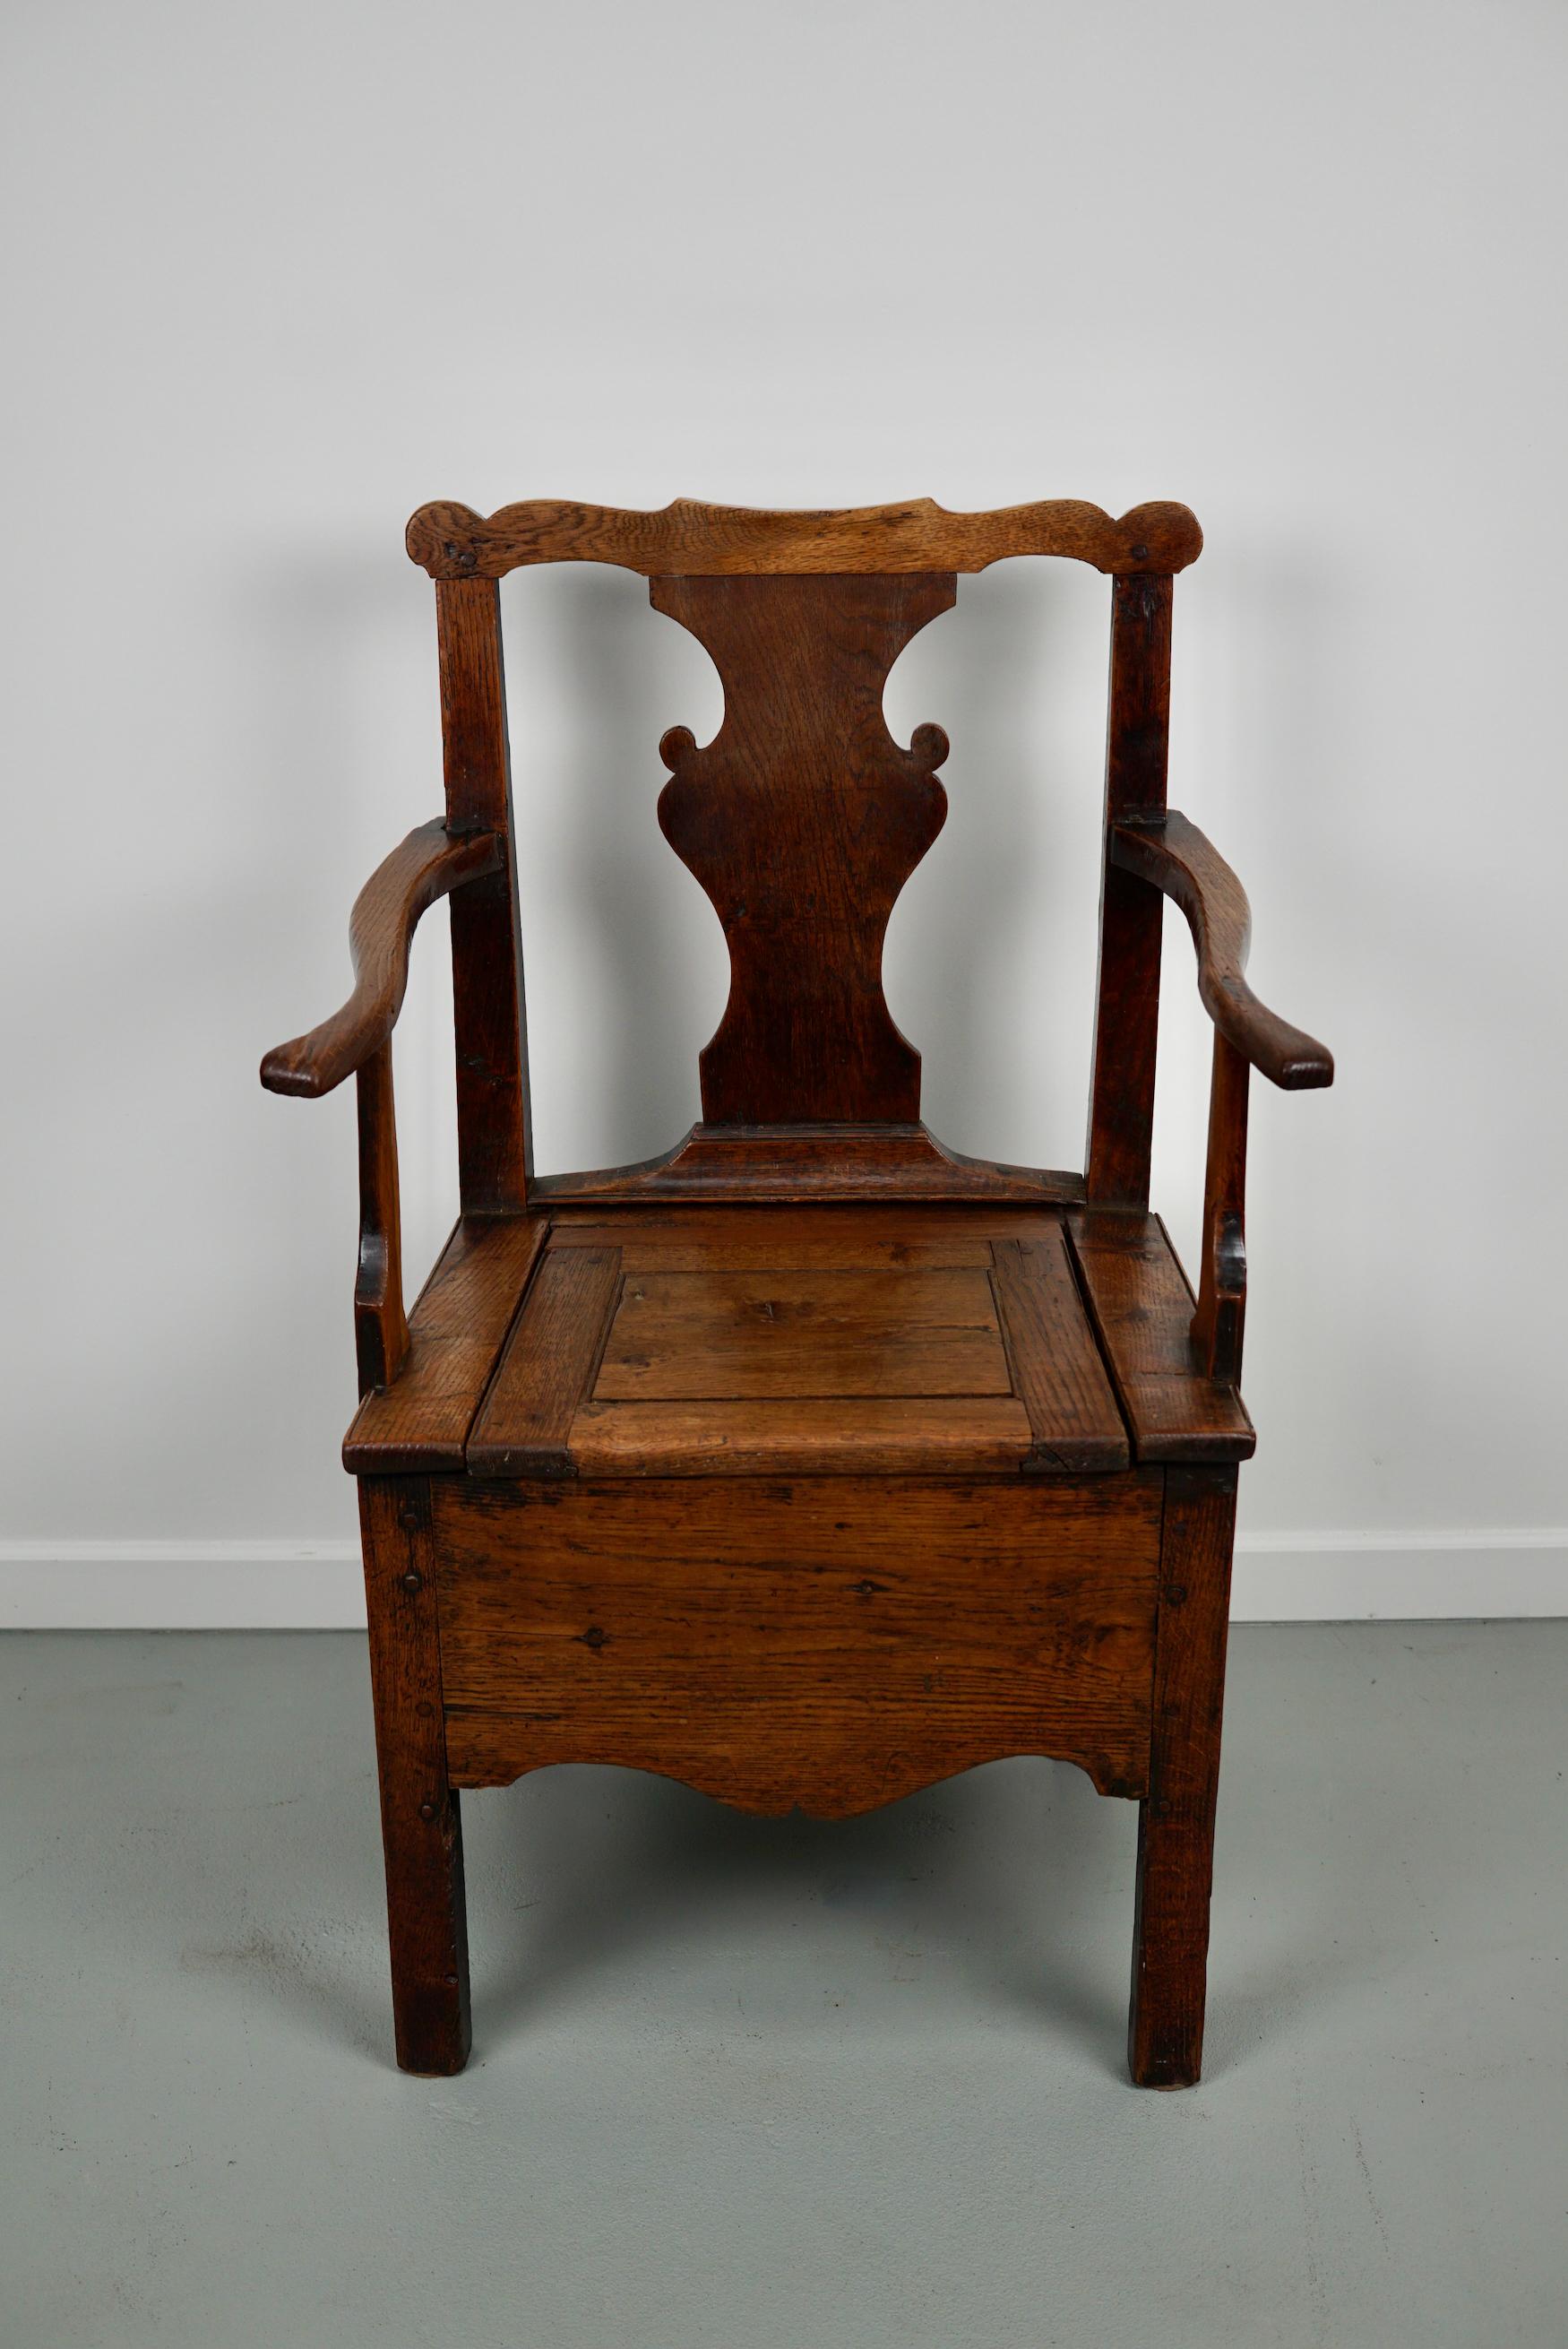 This commode chair was made in the 18th century in England. It remains in a very good condition with a nice warm color and patina.